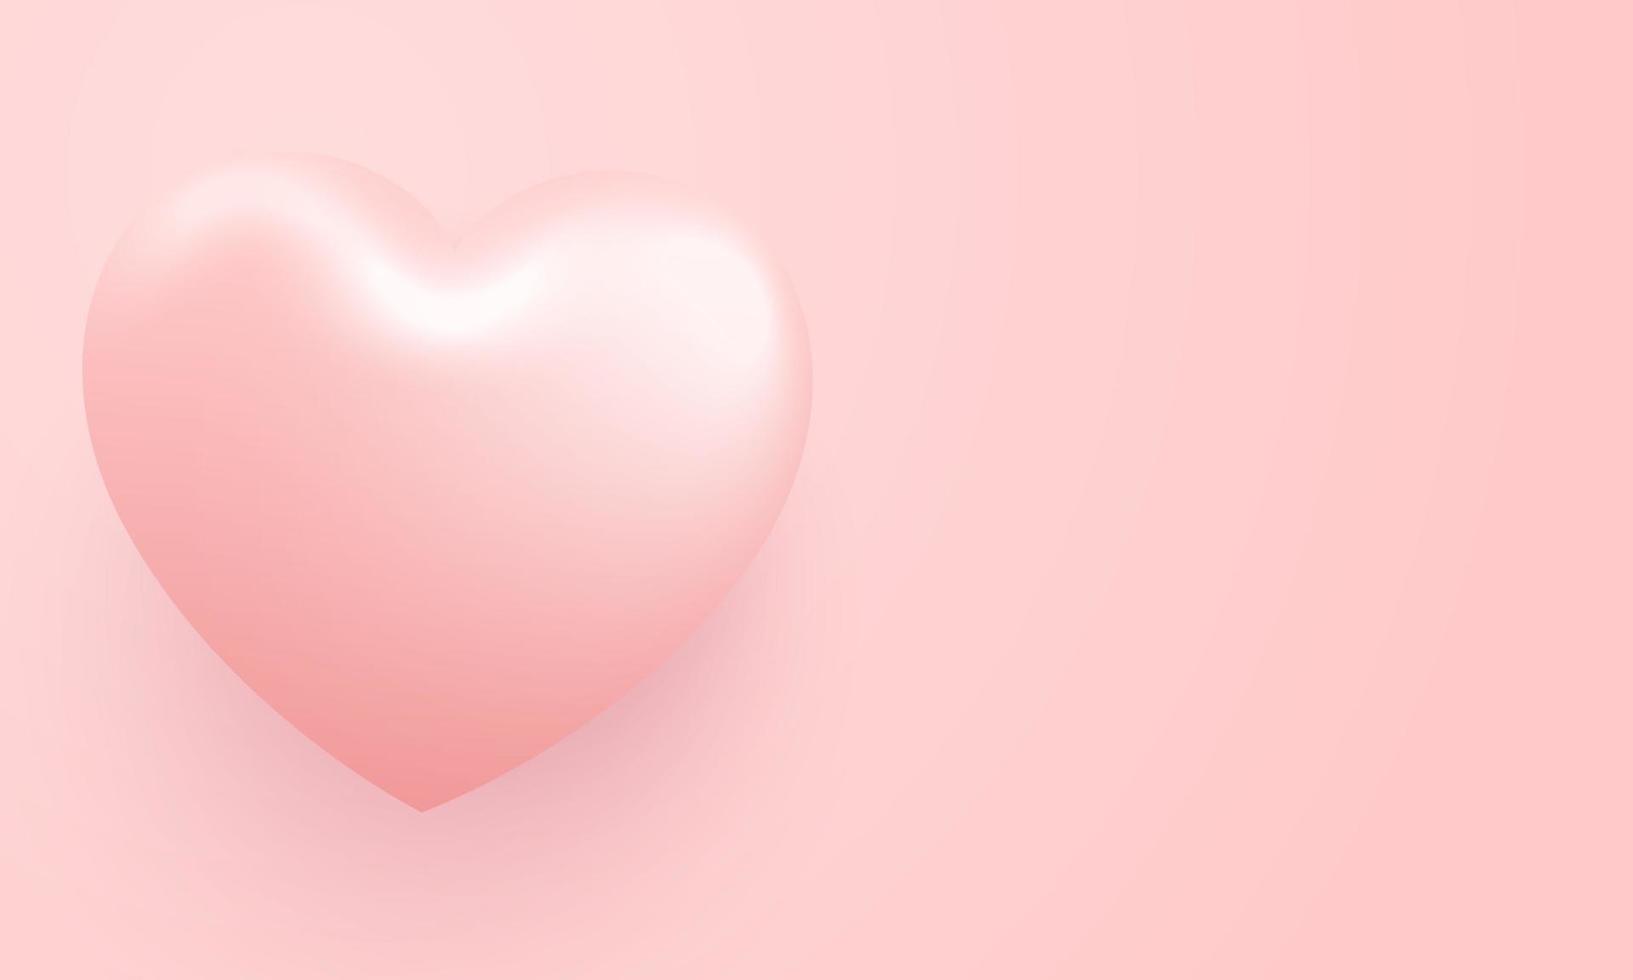 Love Happy Valentine's day background illustration. Beautiful pink background with realistic big heart vector